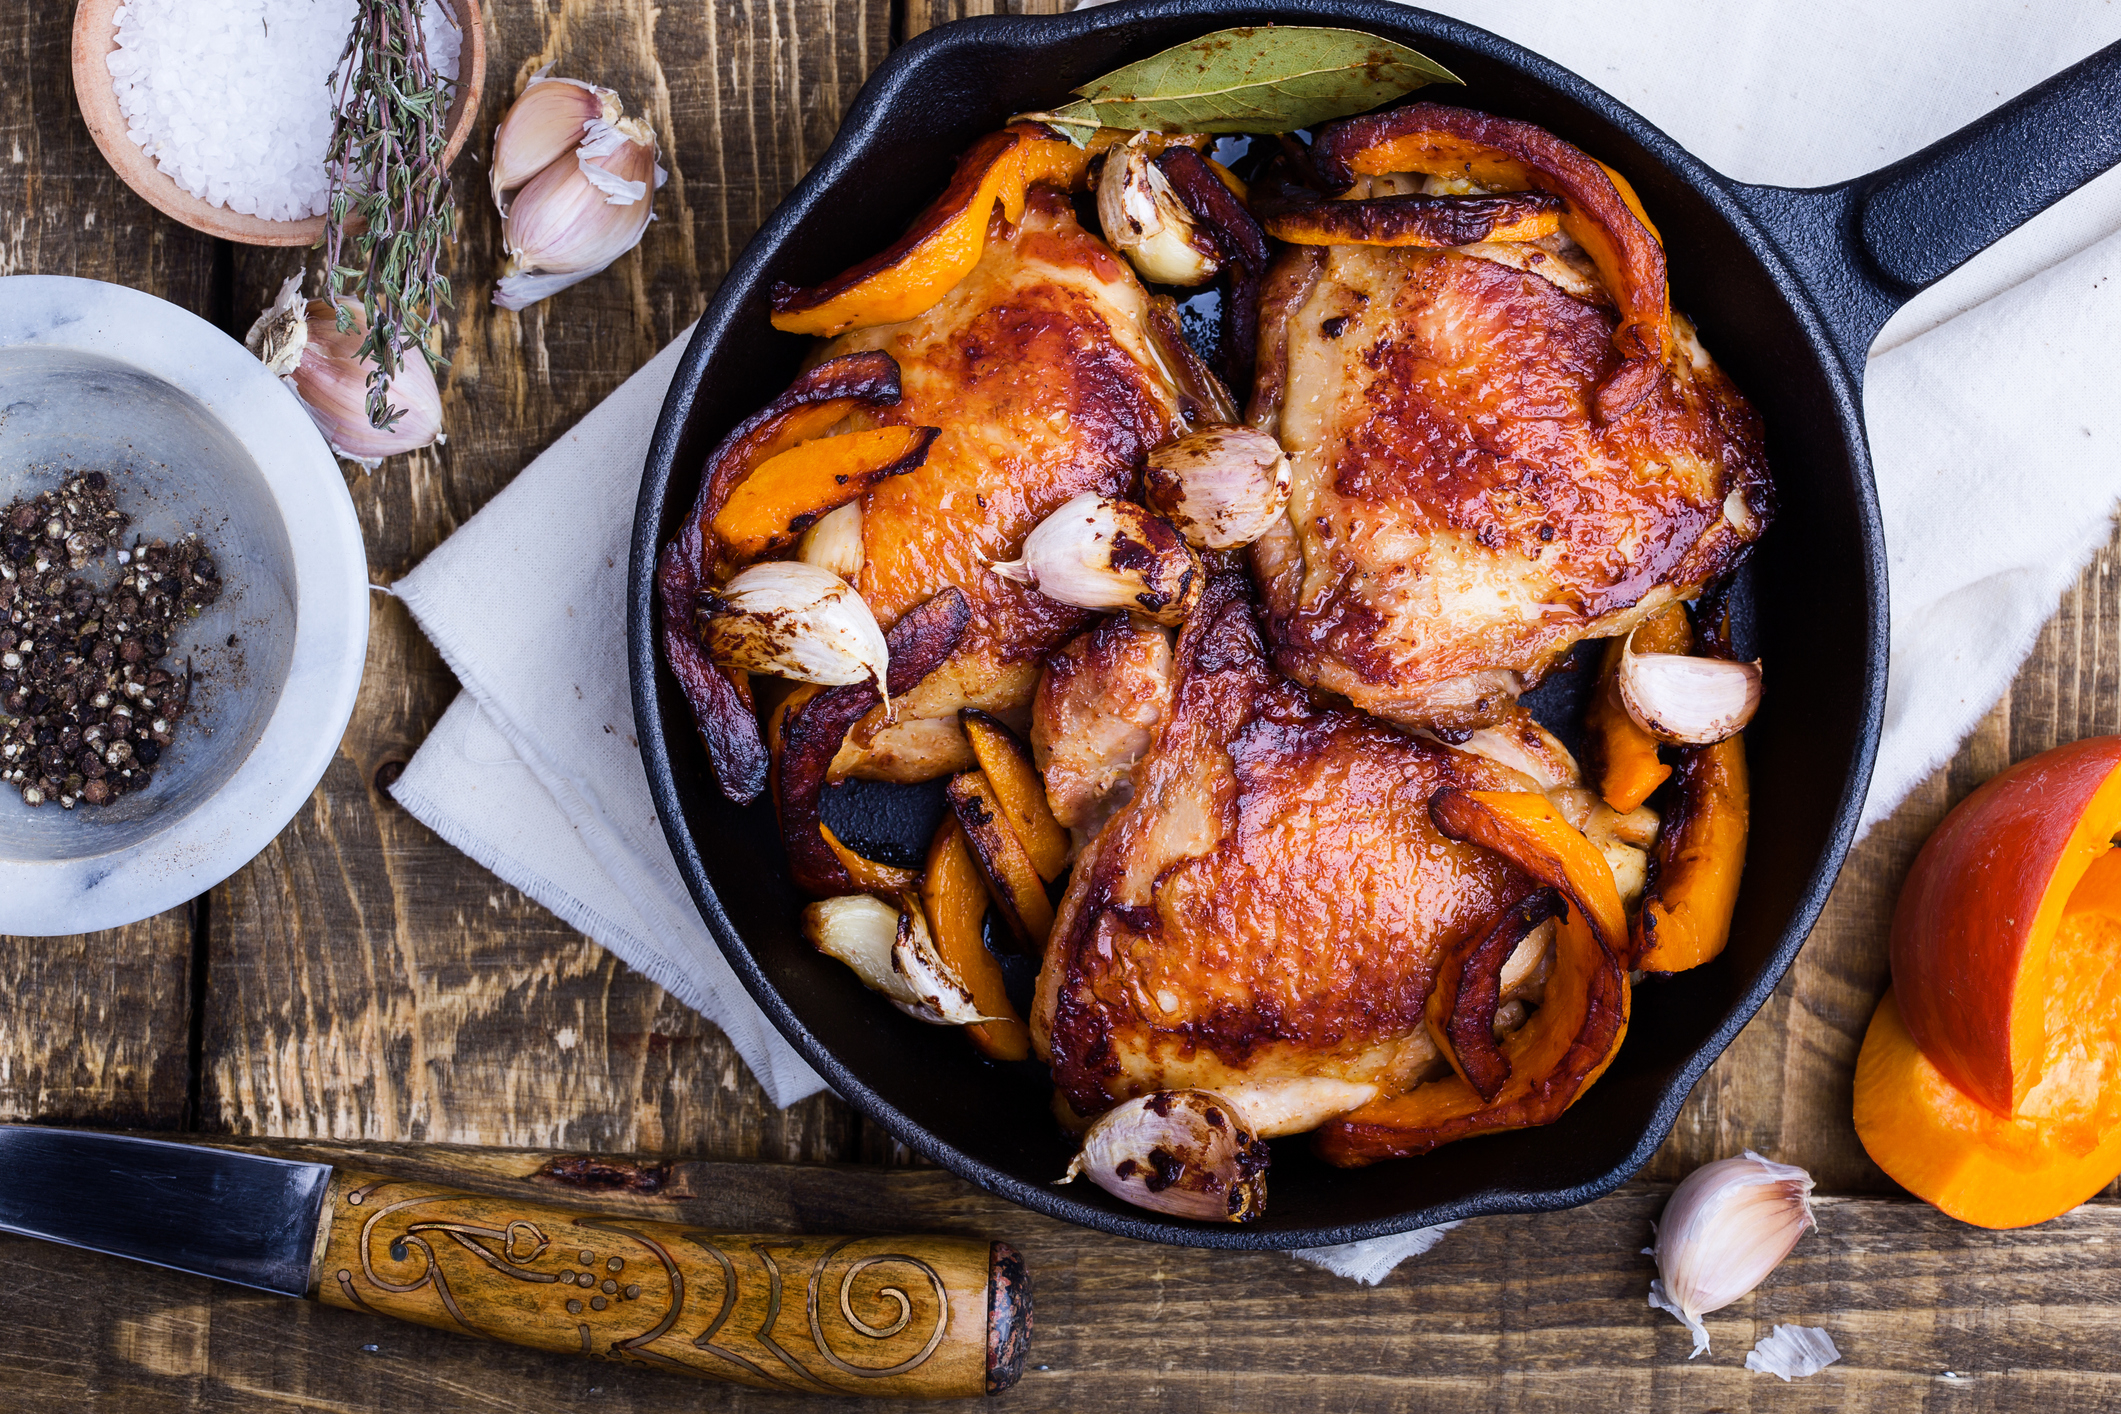 Skillet with roasted chicken thighs and vegetables on wooden surface